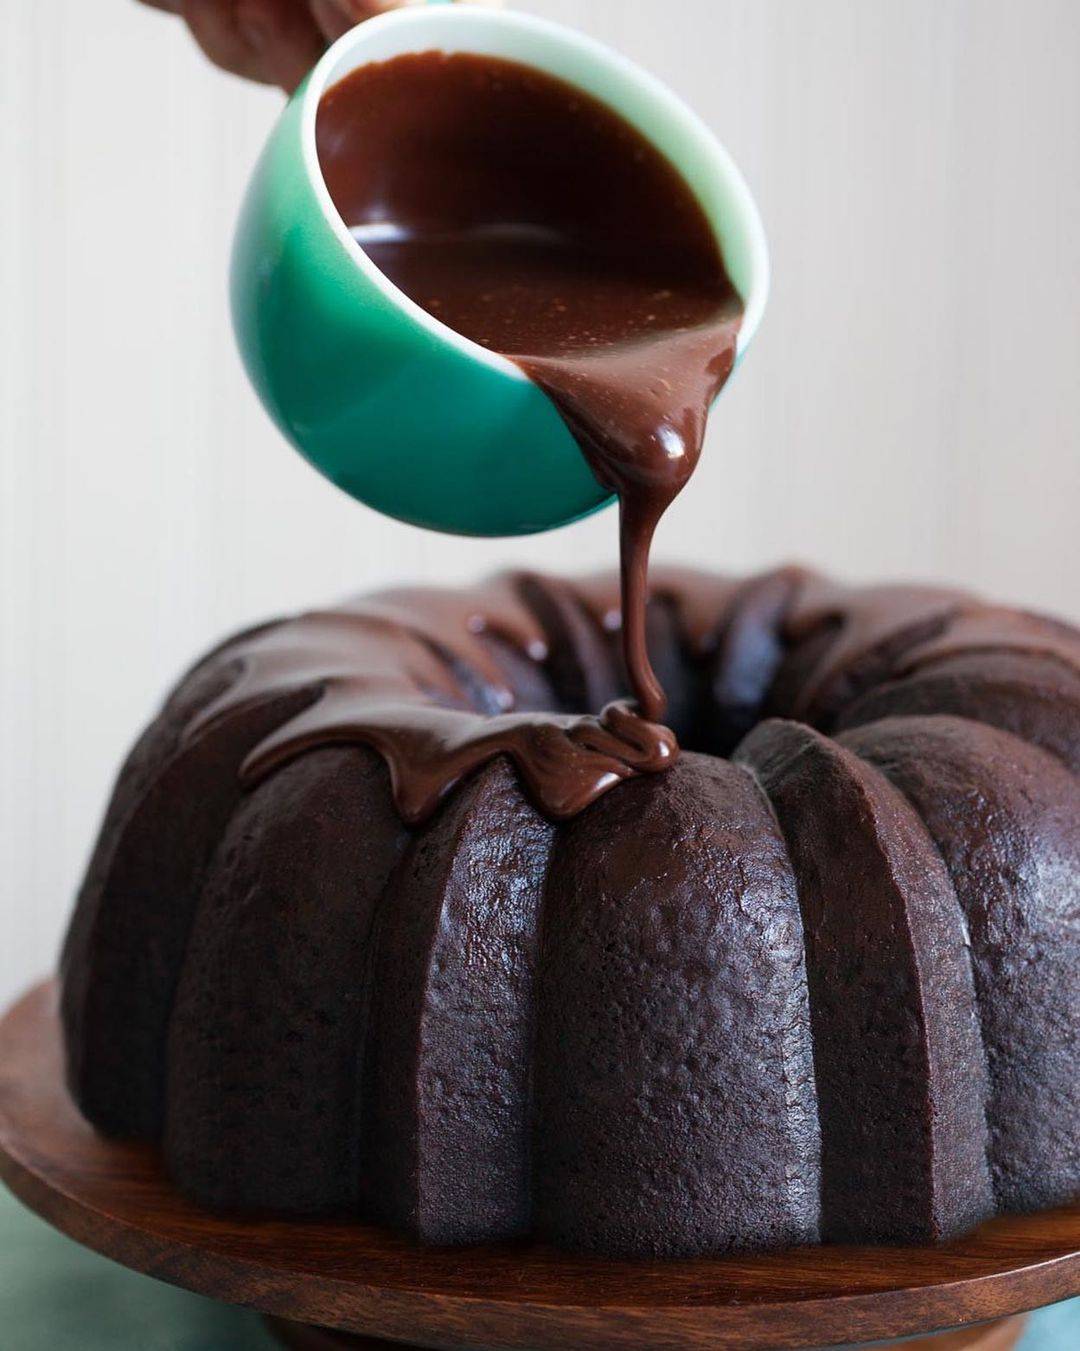 A delicious chocolate stout bundt cake ok a wooden cake stand, with chocolate glaze pouring out of a mug.